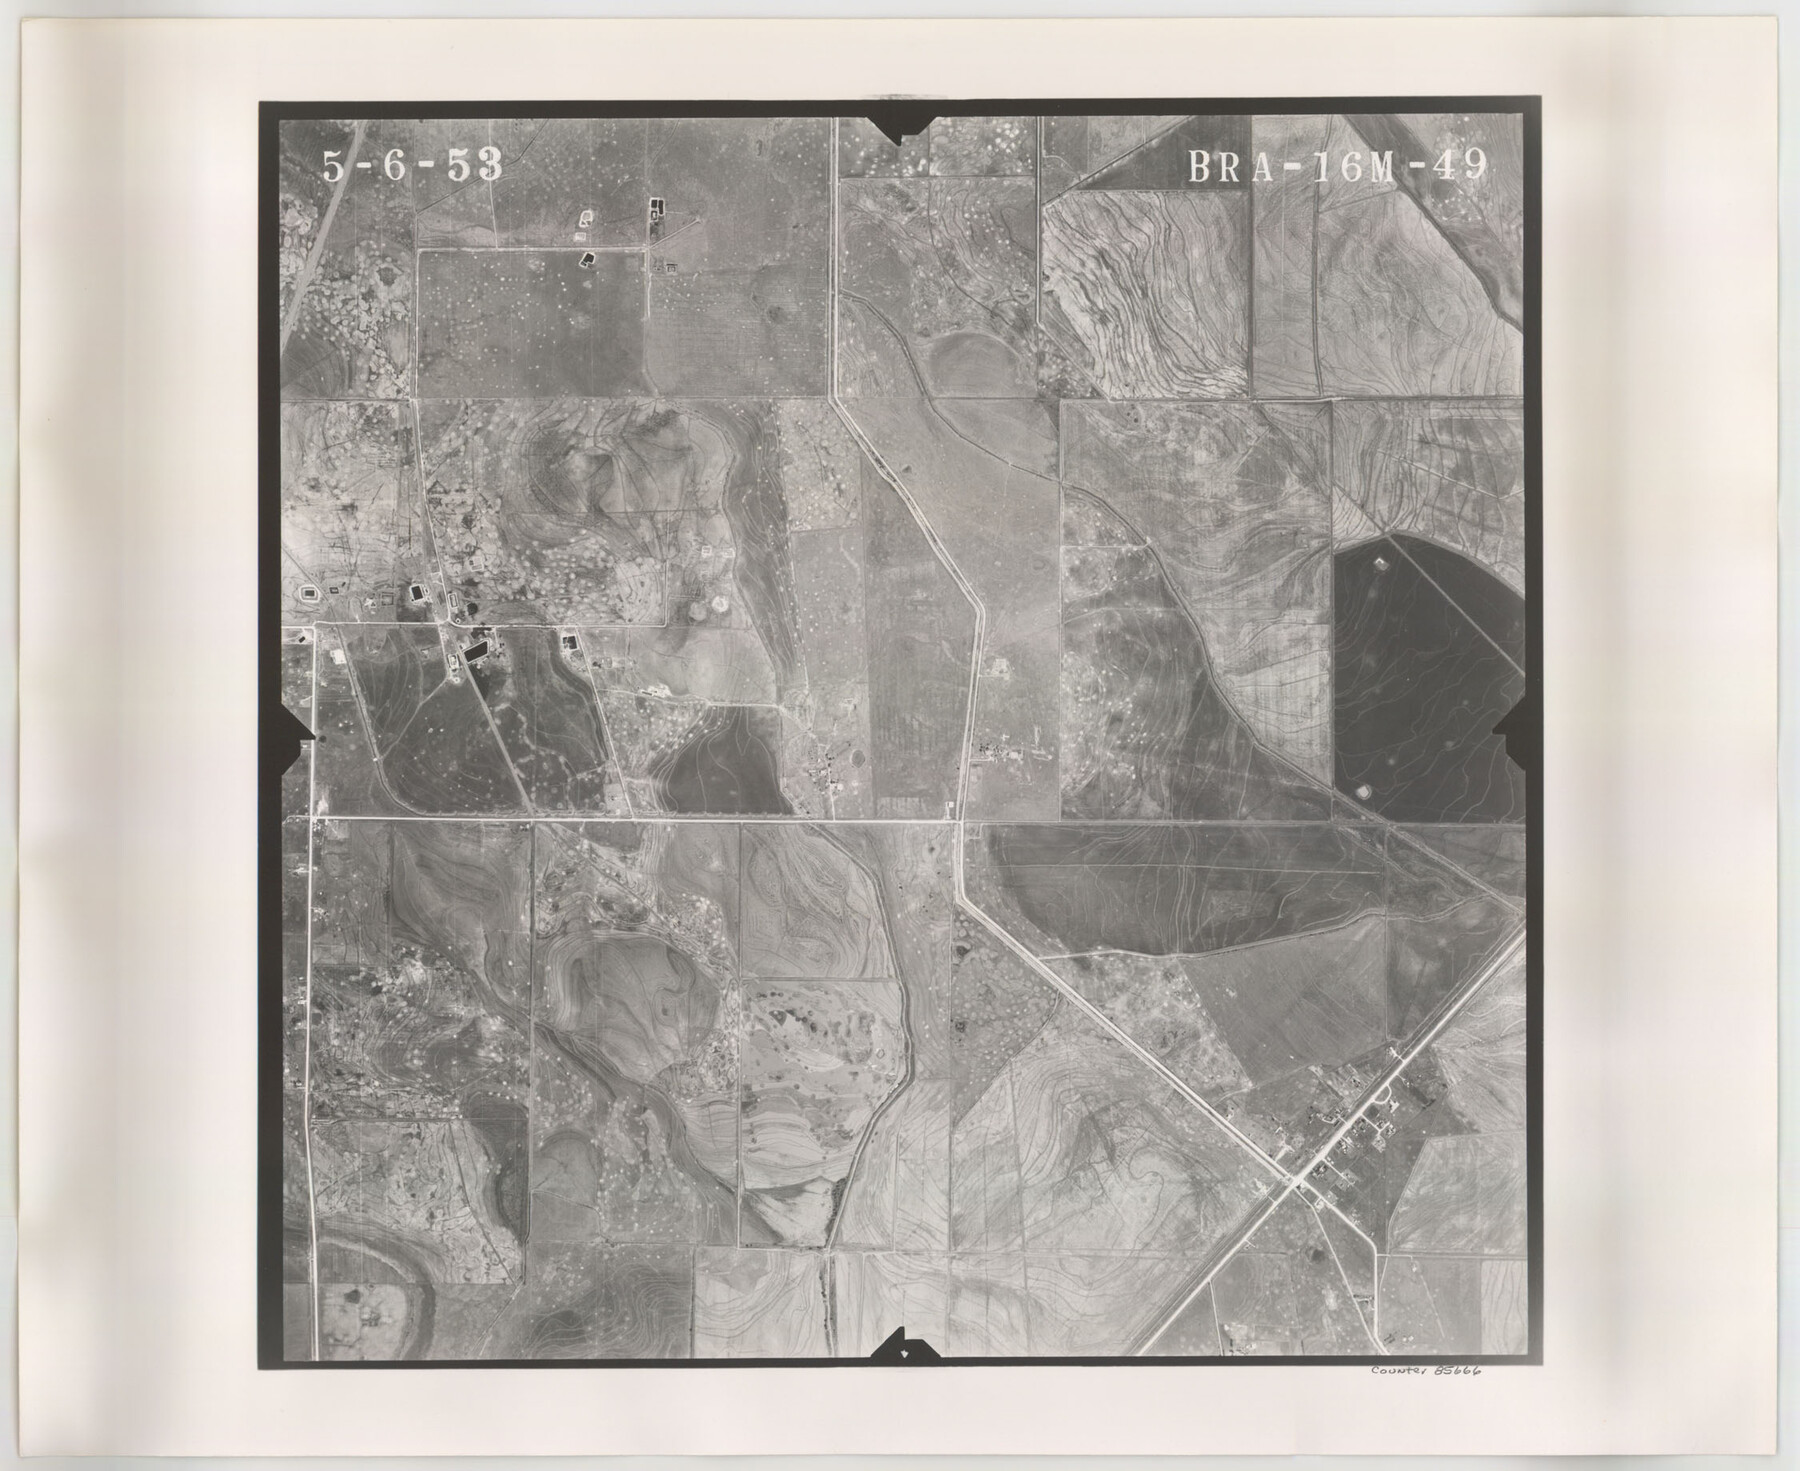 85666, Flight Mission No. BRA-16M, Frame 49, Jefferson County, General Map Collection